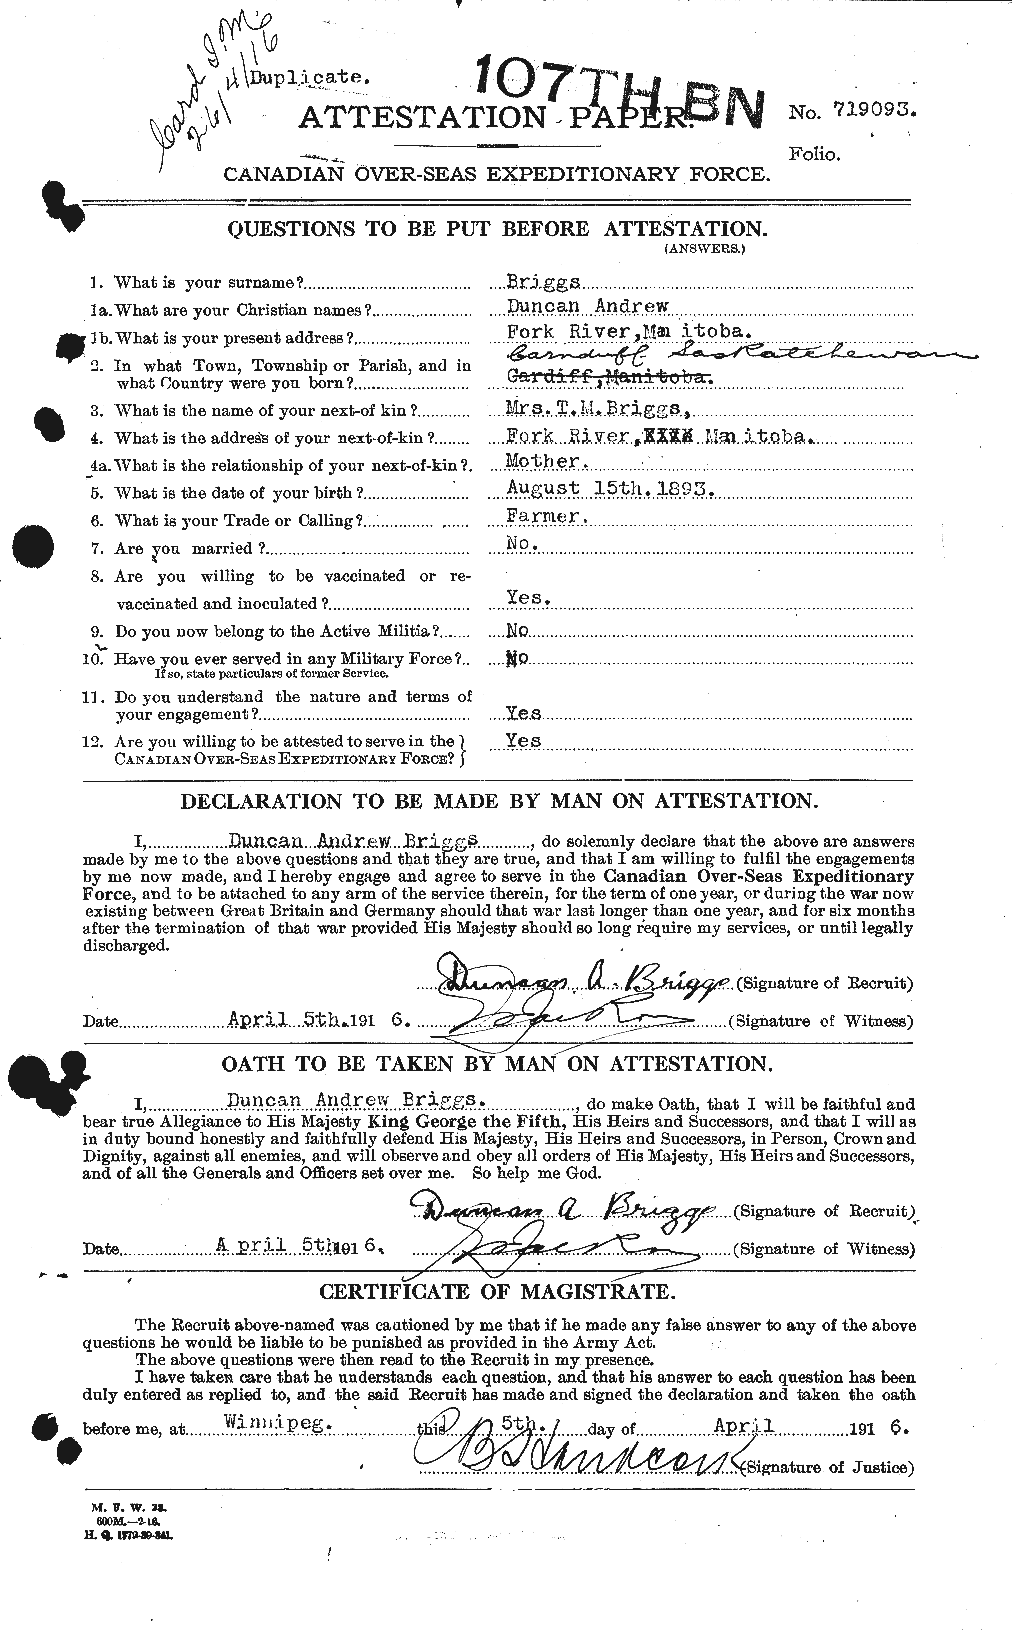 Personnel Records of the First World War - CEF 263993a